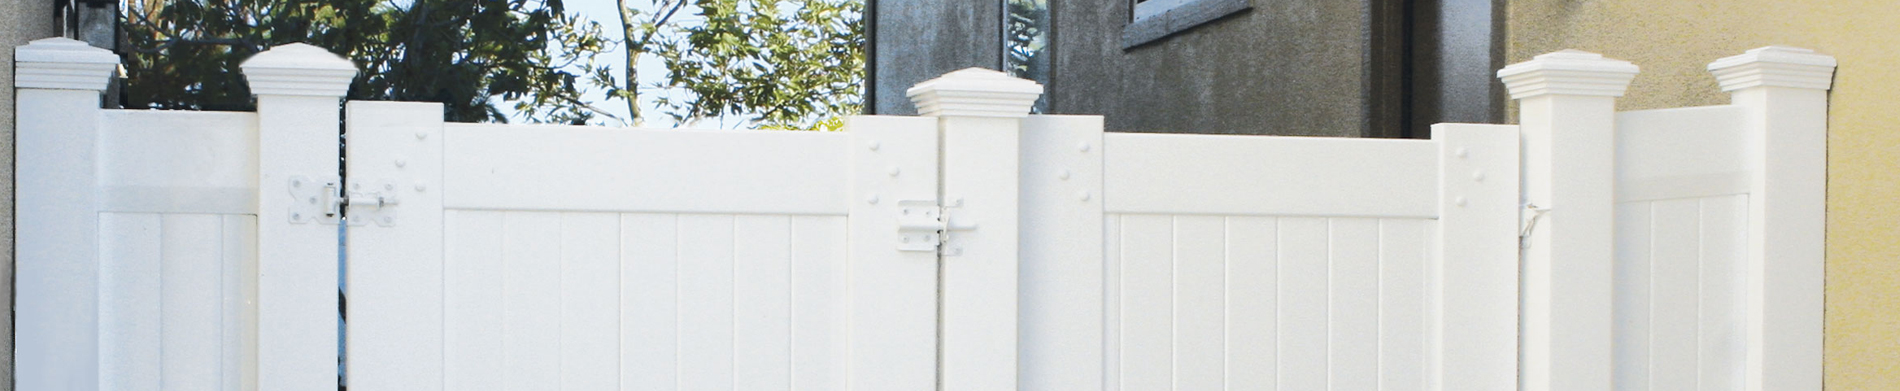 Fencing is a part of home improvement – Install a vinyl fence before the New Year arrives